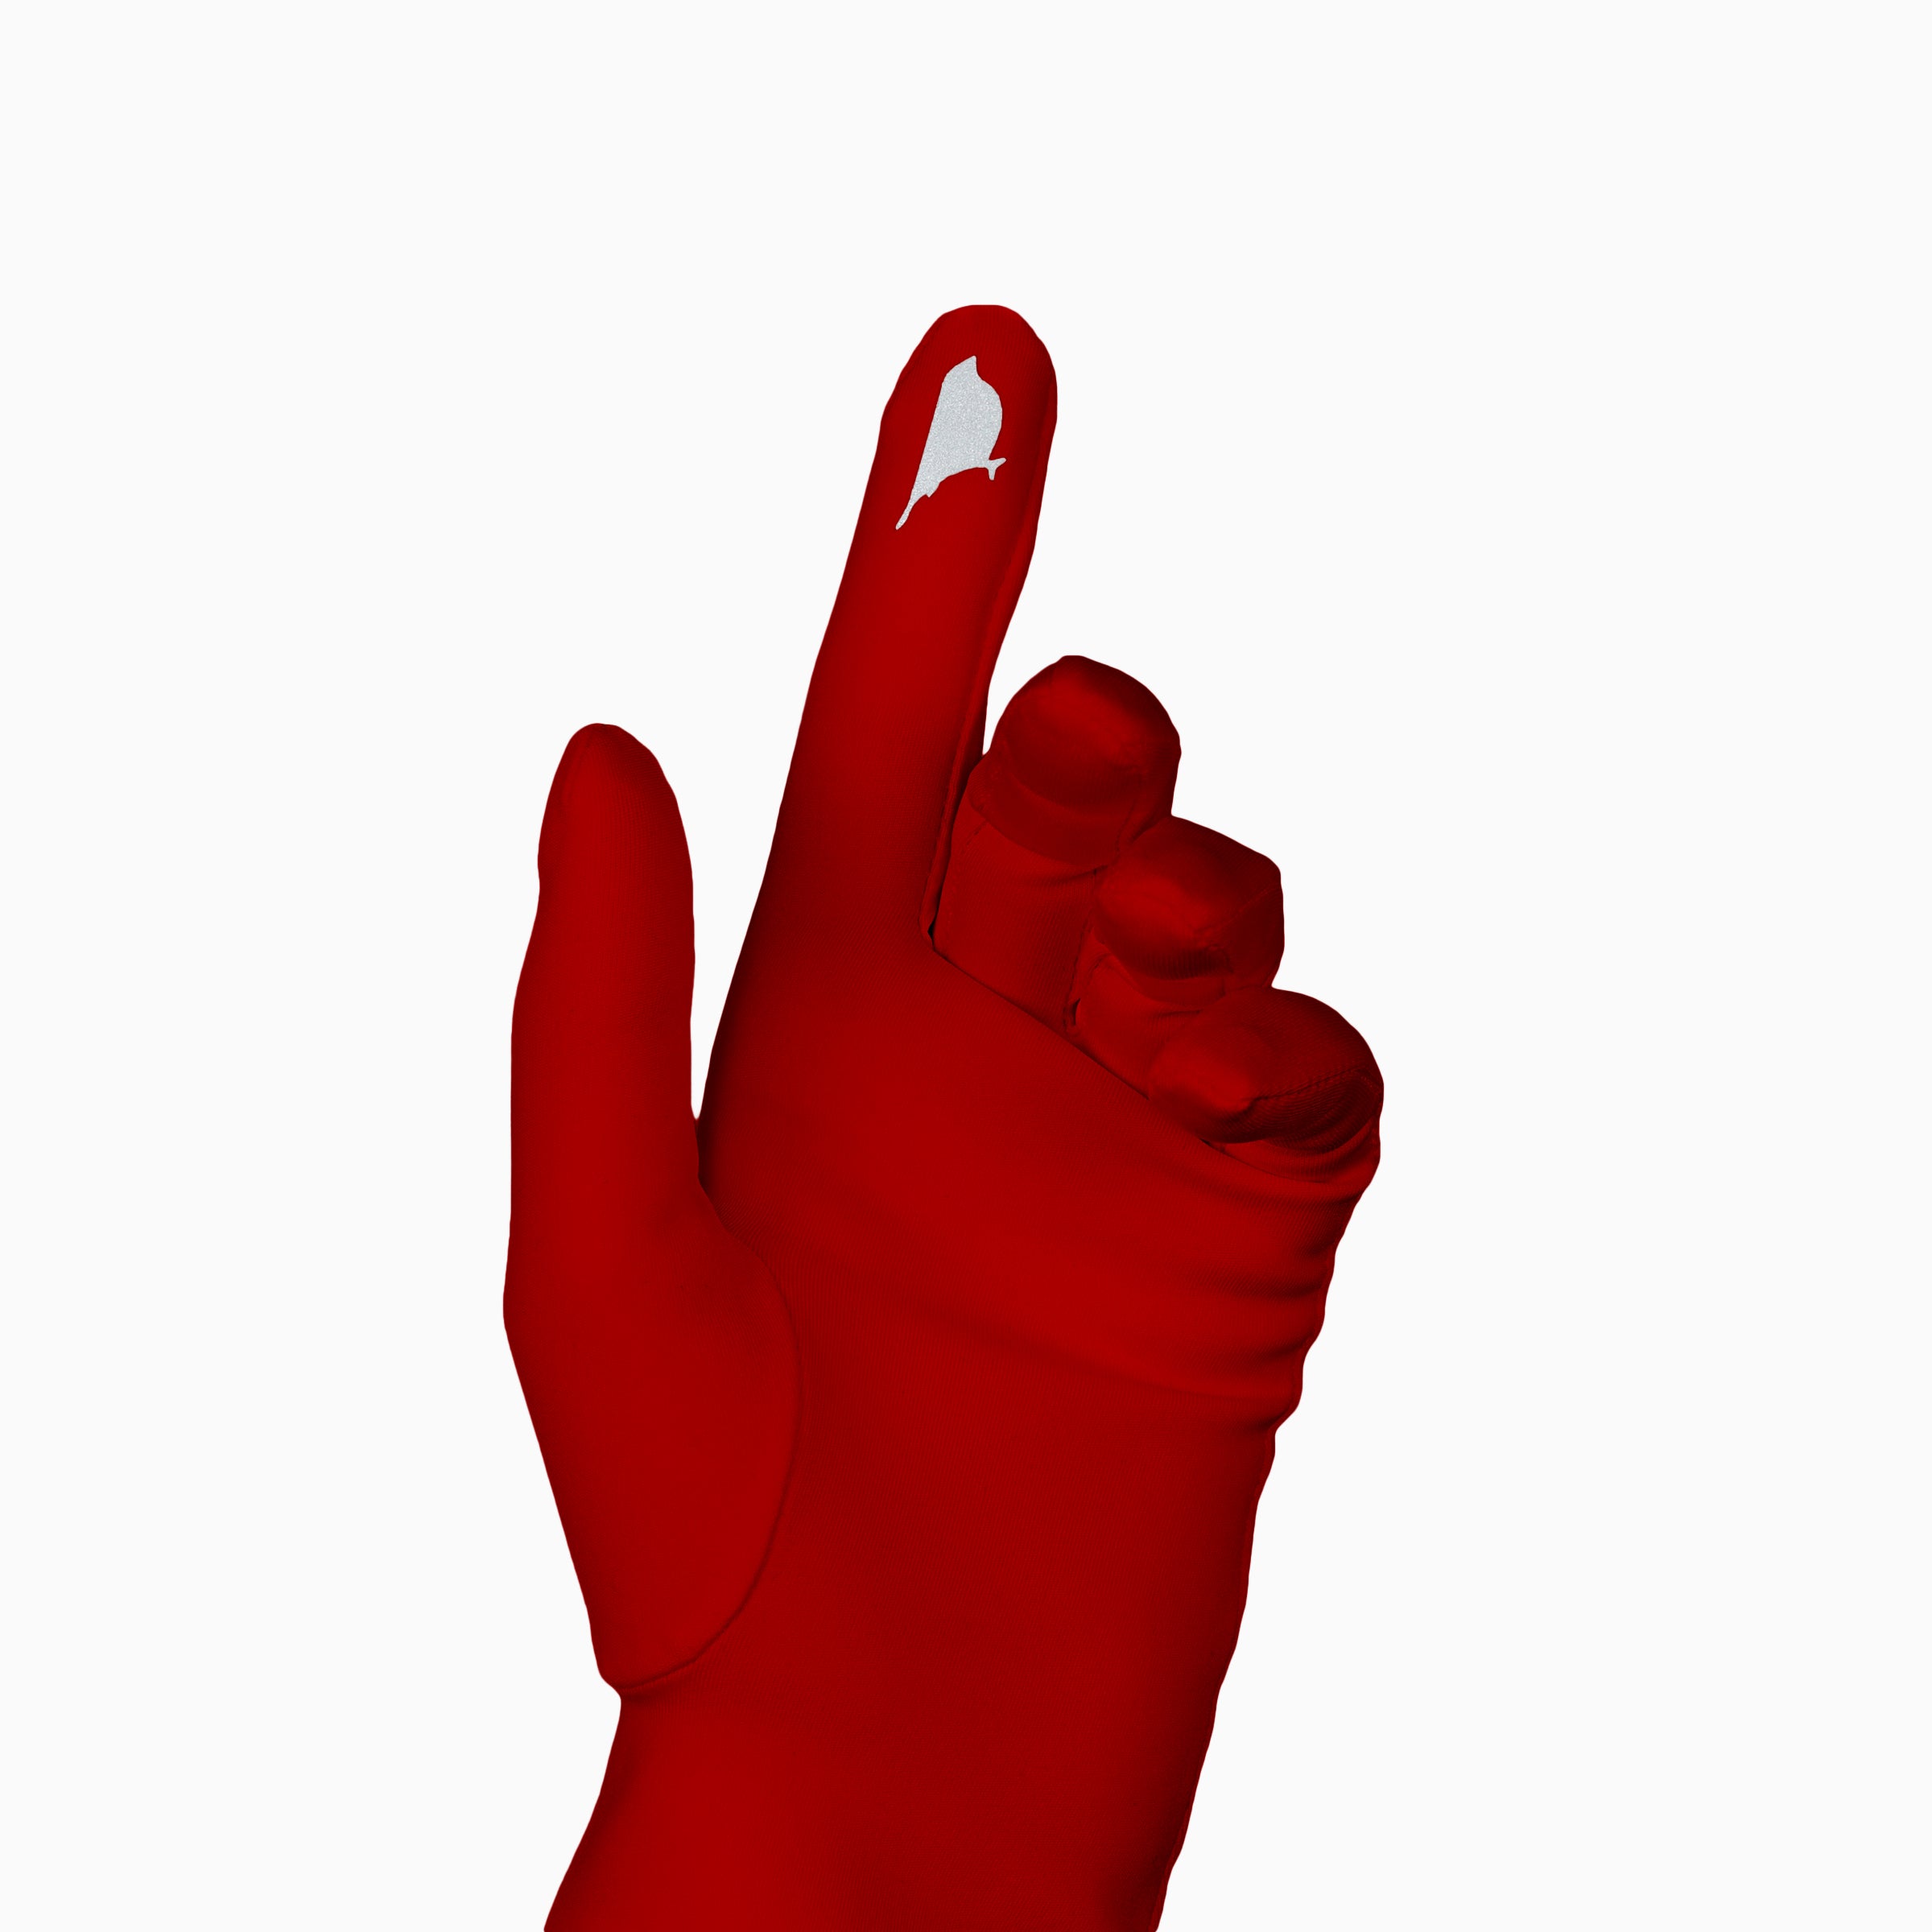 A 3d model of a hand with THE ISABELLE - Red Day Glove - Holiday Edition by LadyFinch on a white background.